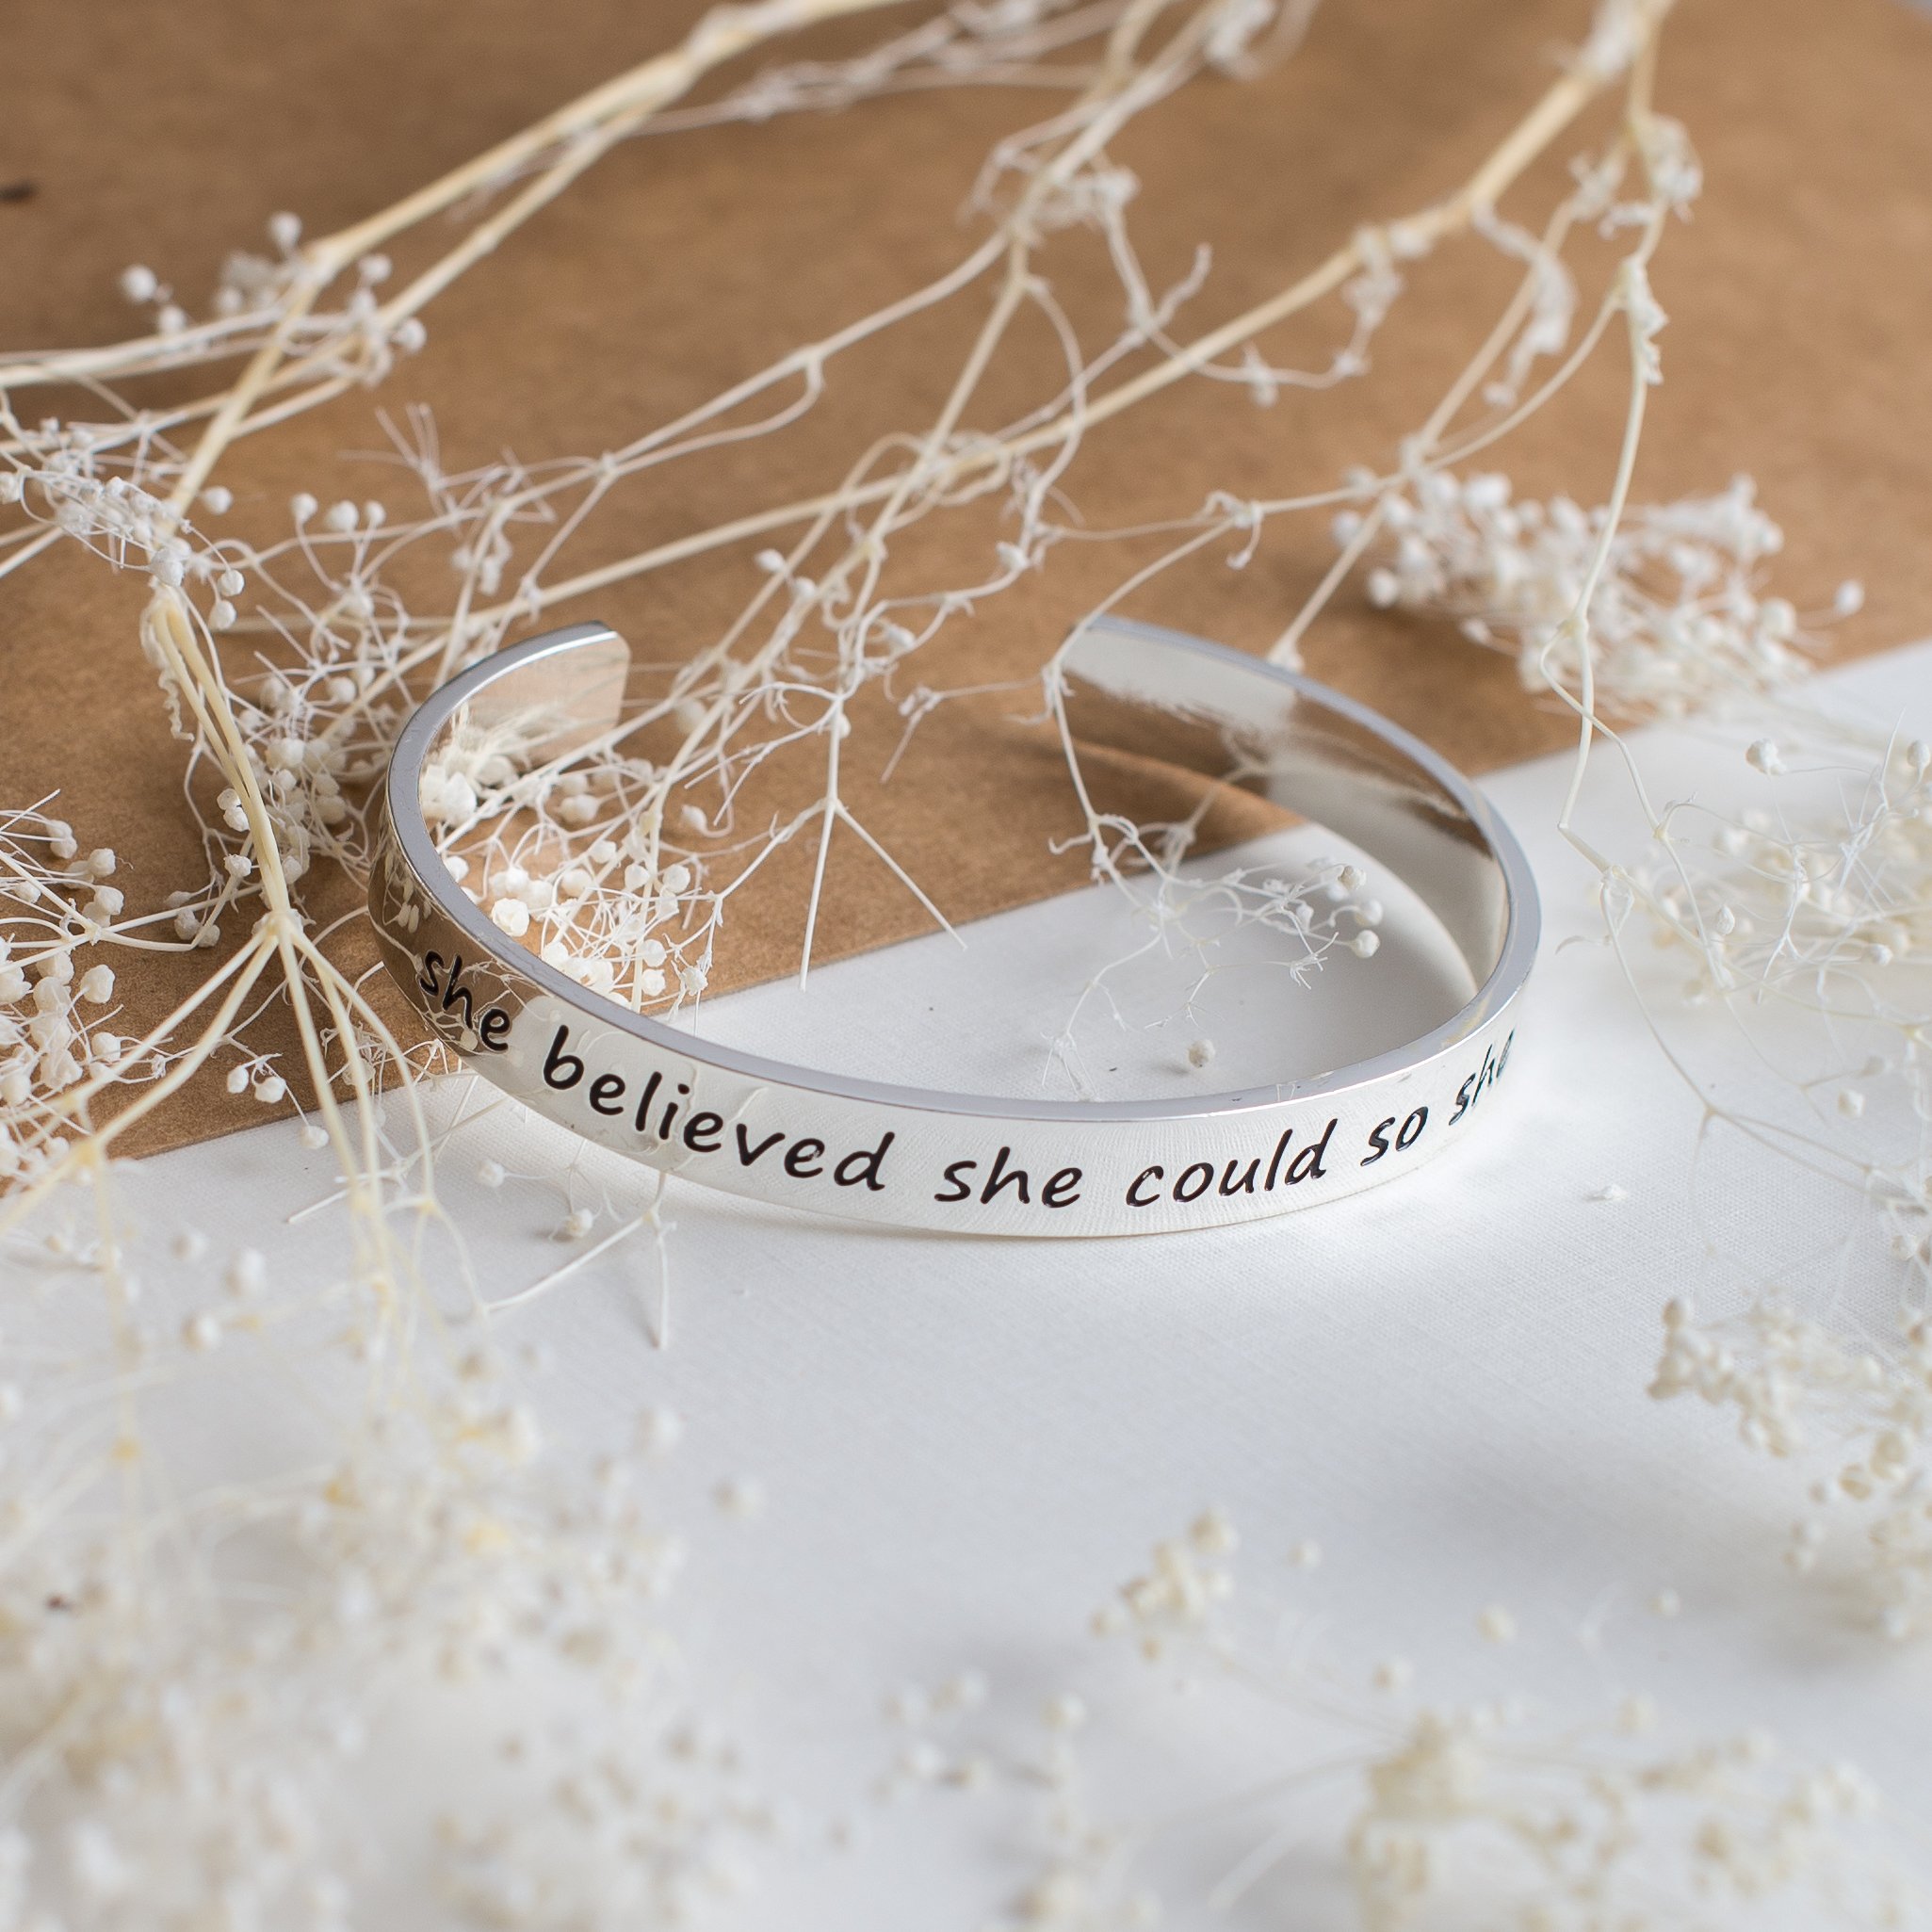 Inspirational Silver Cuff Bracelet – Stamped “She Believed She Could So She Did” Jewelry for Women, Teens, Girls – Motivational Quotes Mantra Band Bracelets – Perfect Gift